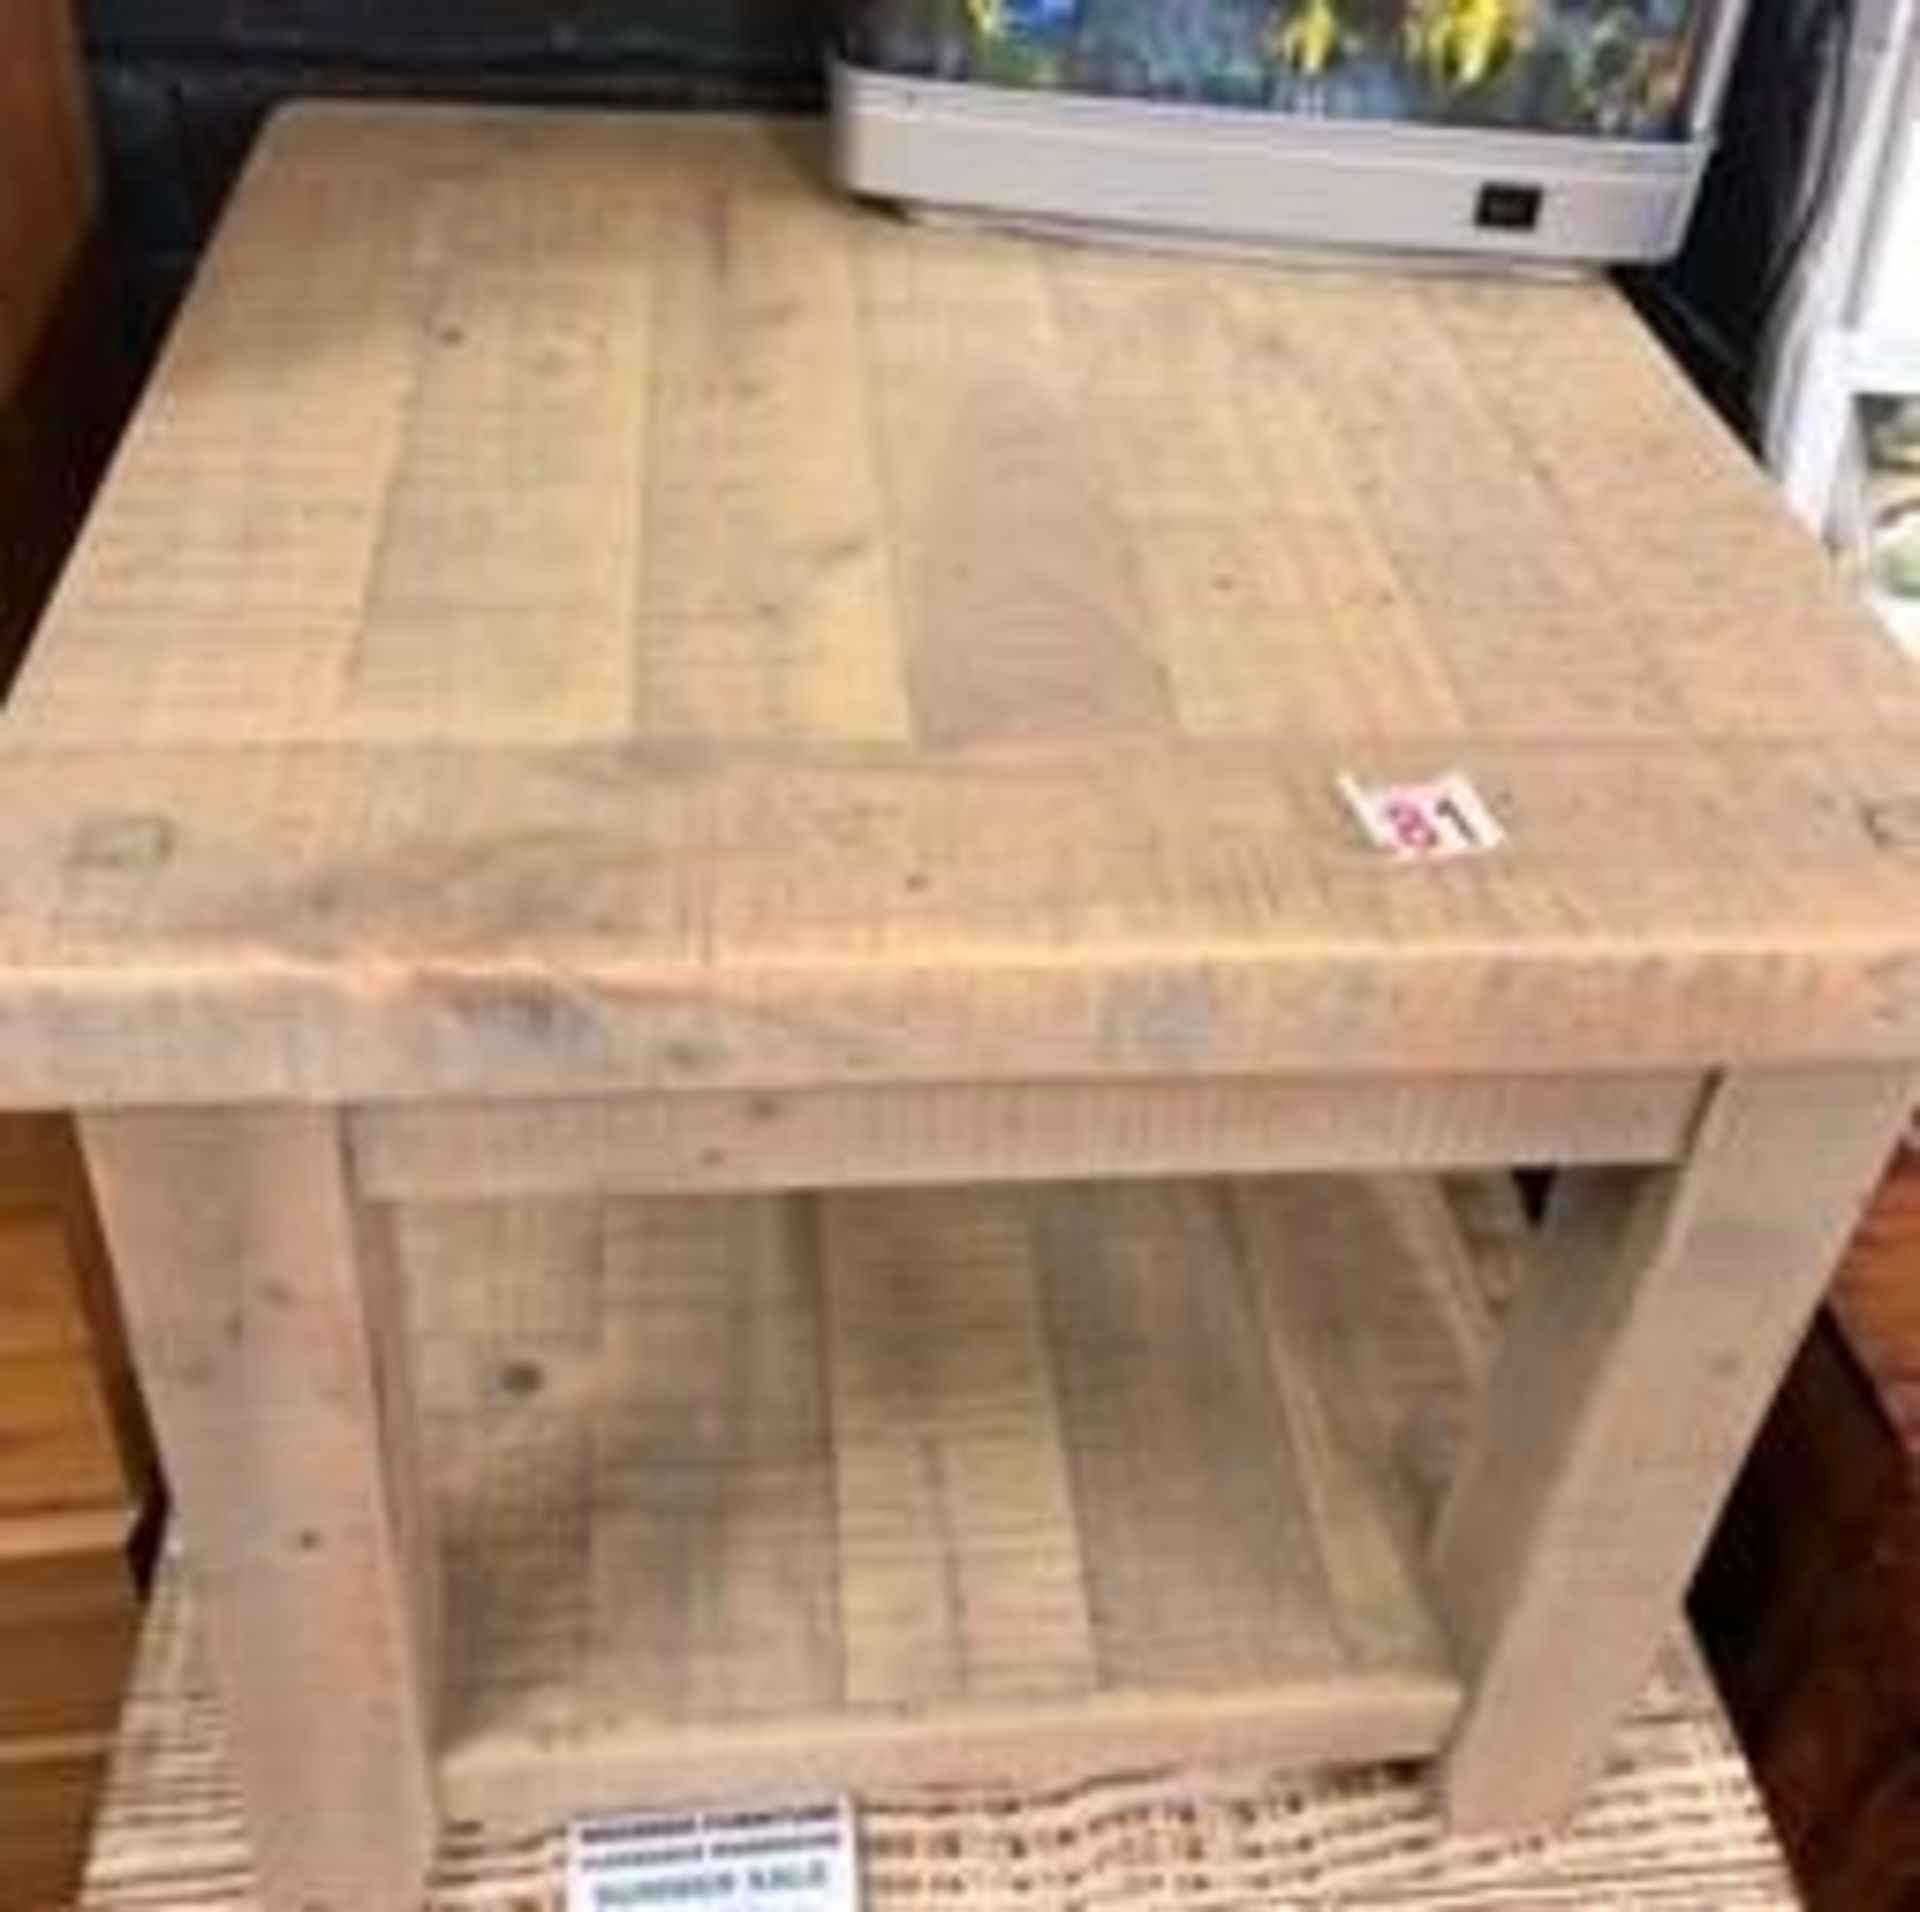 *EX DISPLAY* IFD Reclaimed distressed limed oak finish solid antique pine lamp table.